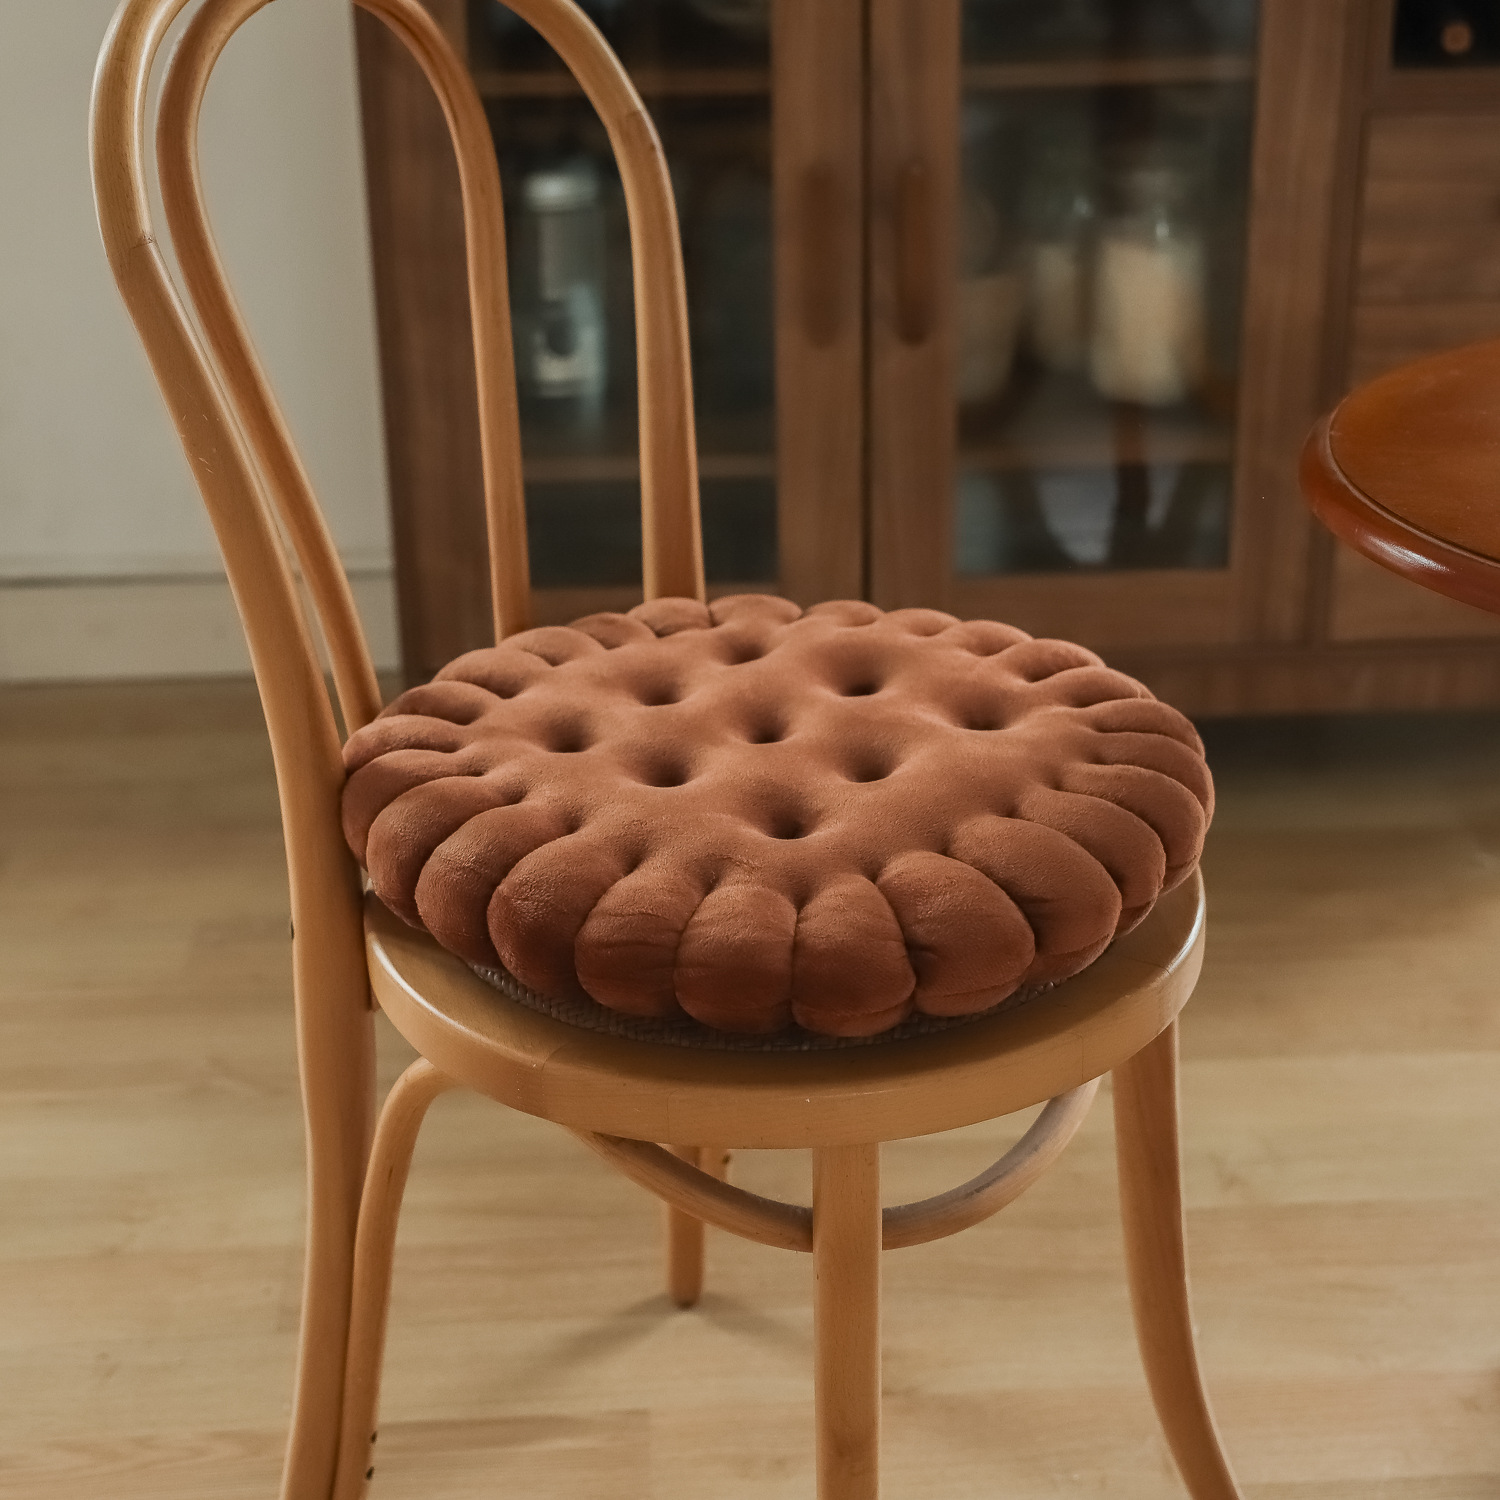 Rotimia Japanese tatami biscuit chair cushion with thick cushion